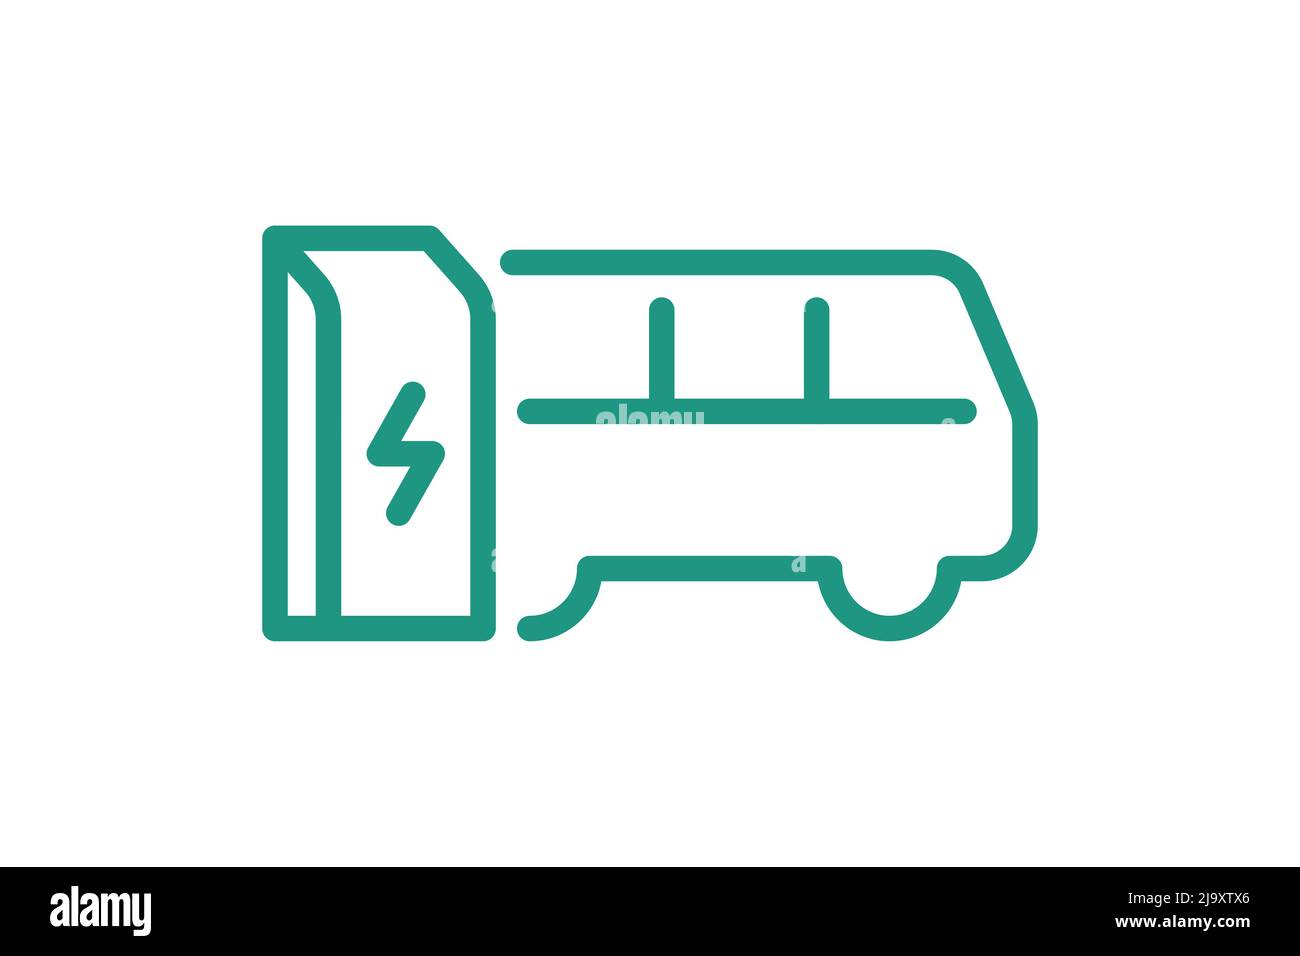 Electric bus charging in charger station linear icon. Electrical e-bus energy charge green symbol. Eco friendly electro vehicle recharge sign. Vector battery powered EV transportation eps logo Stock Vector